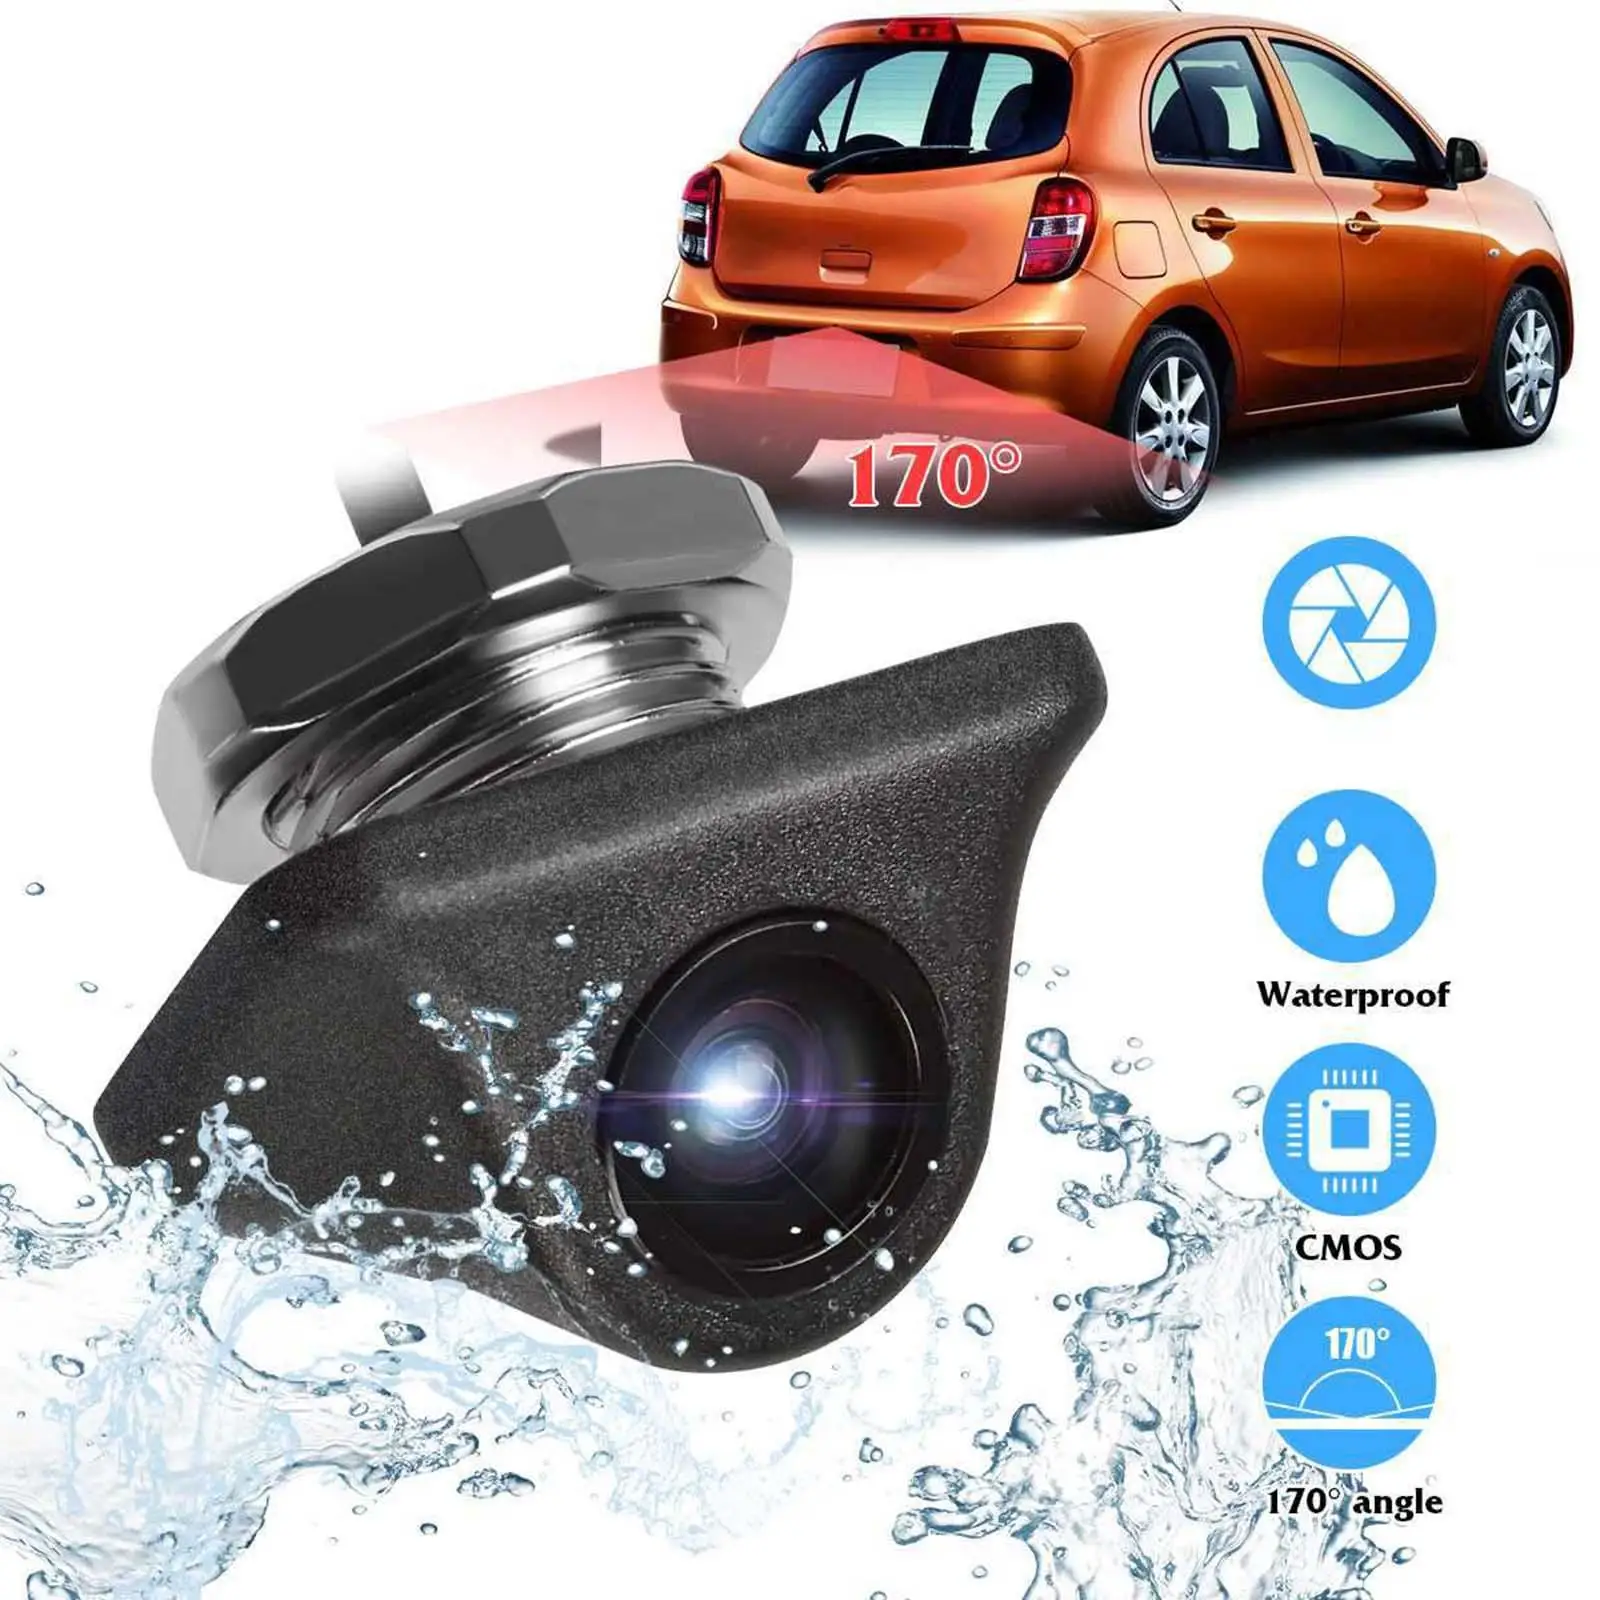 Car Rear View Camera 170° Wide View Backup Camera for Bus RV